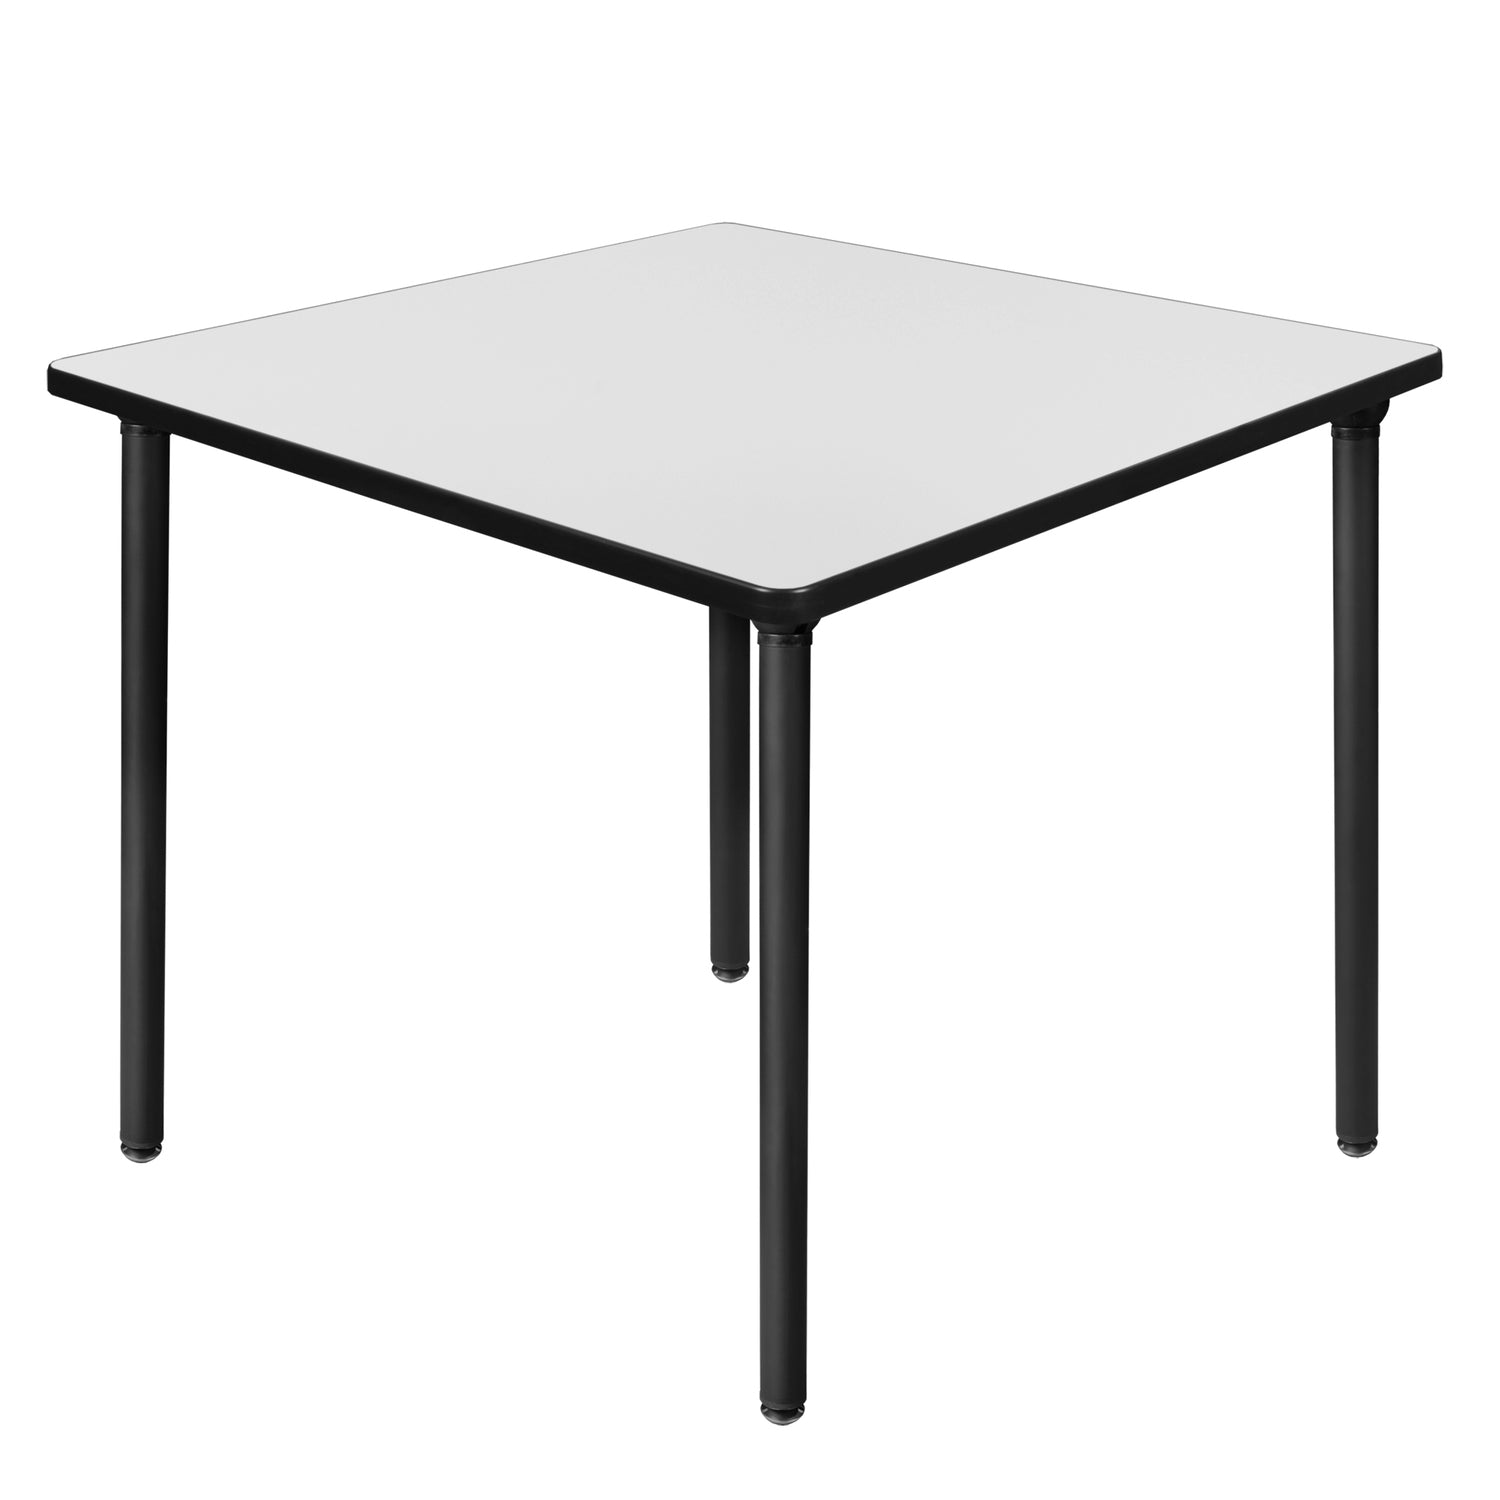 Kee 36" Square Folding Breakroom Table